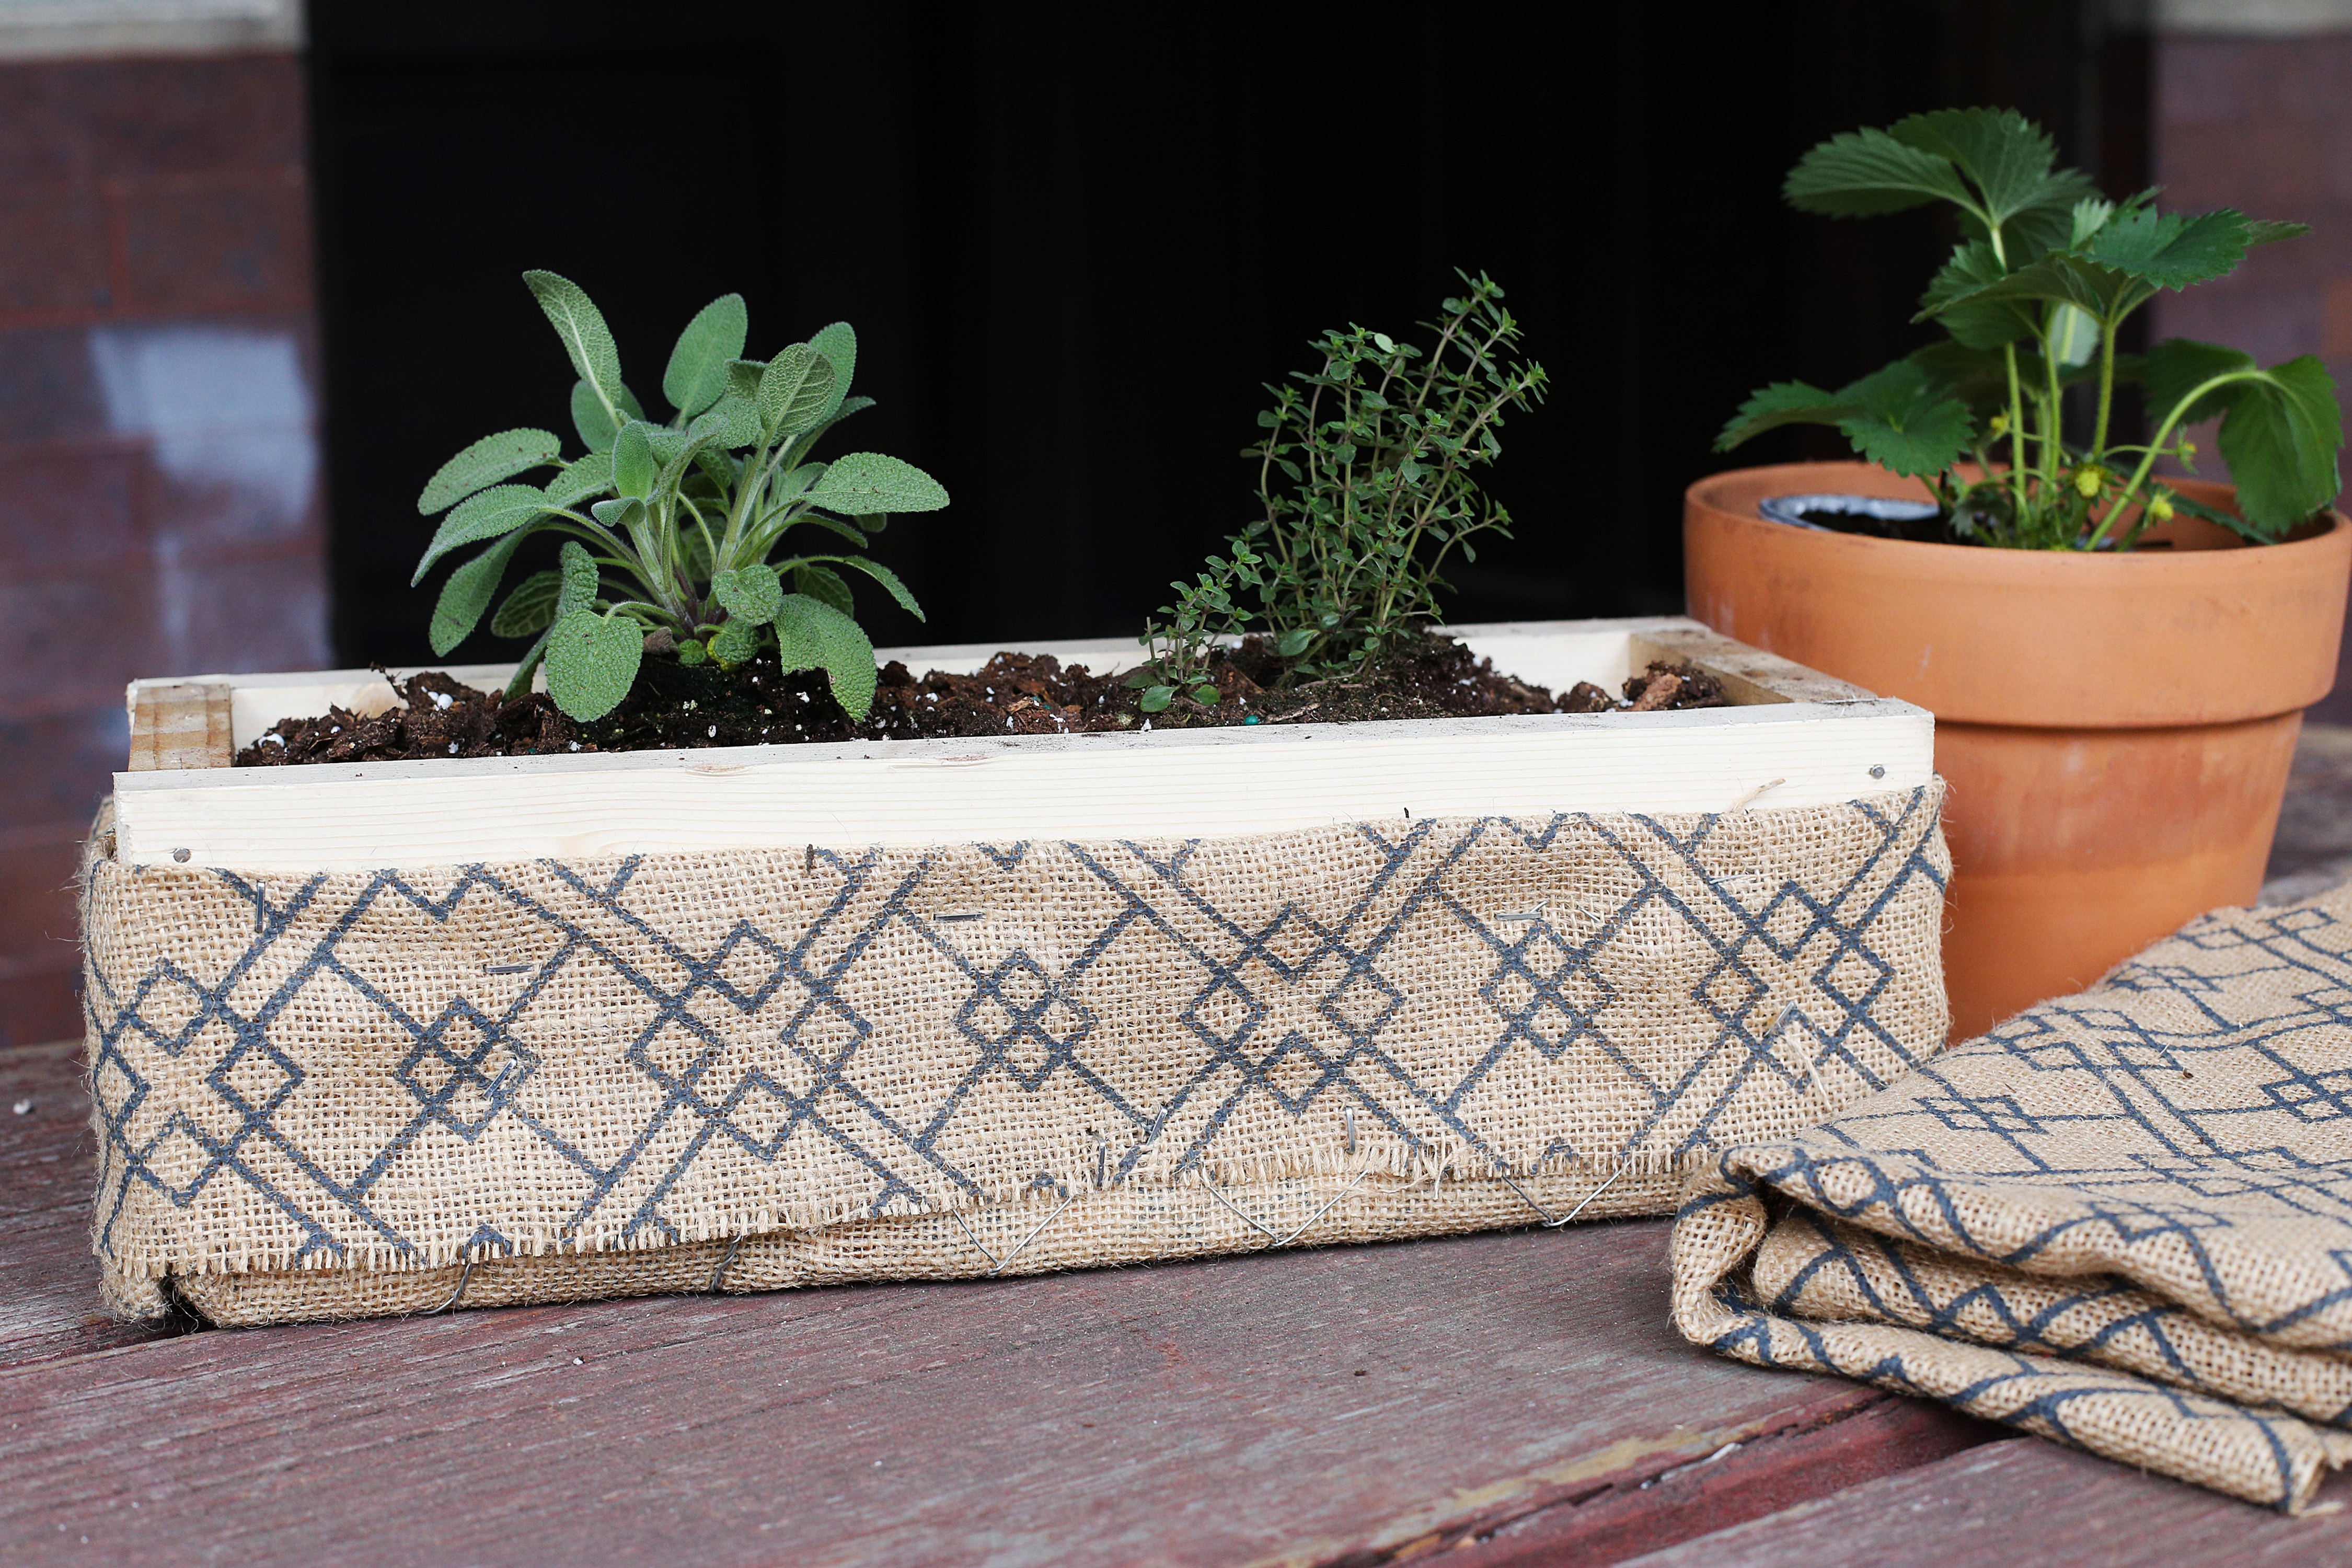 How to Build an Herb Garden Box (with Pictures) | eHow